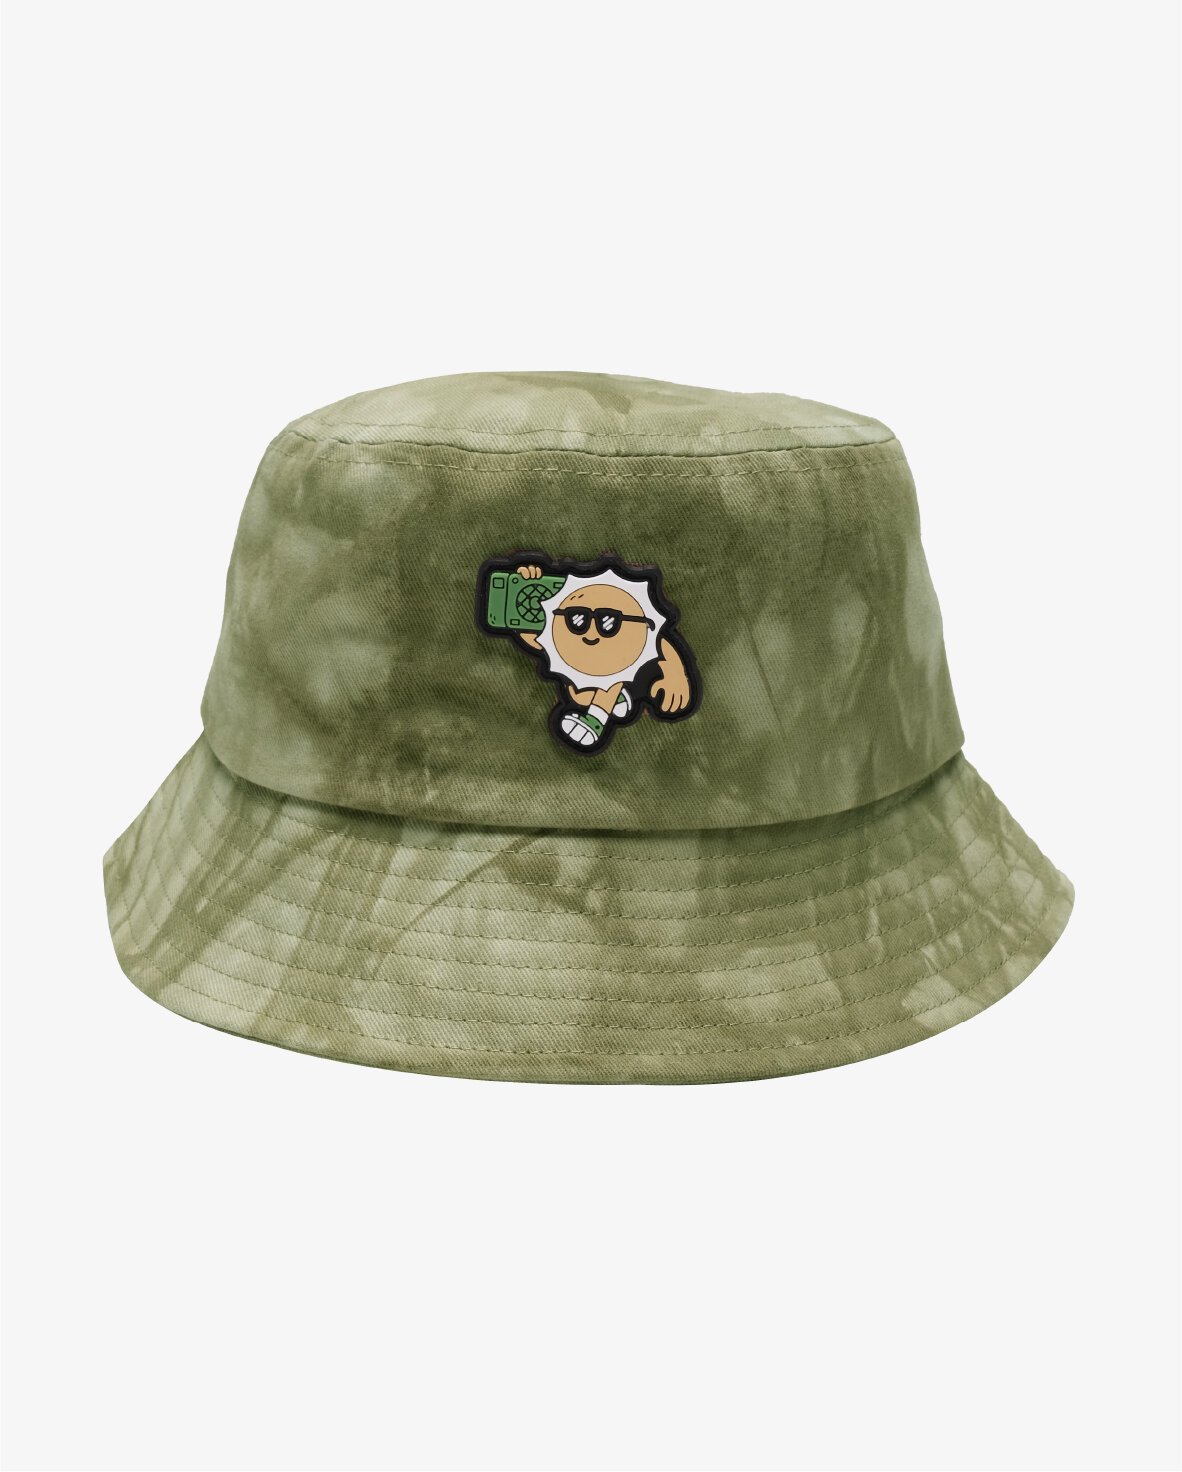 Band Of Boys Bucket Hat - Boys Hats and Sunglasses